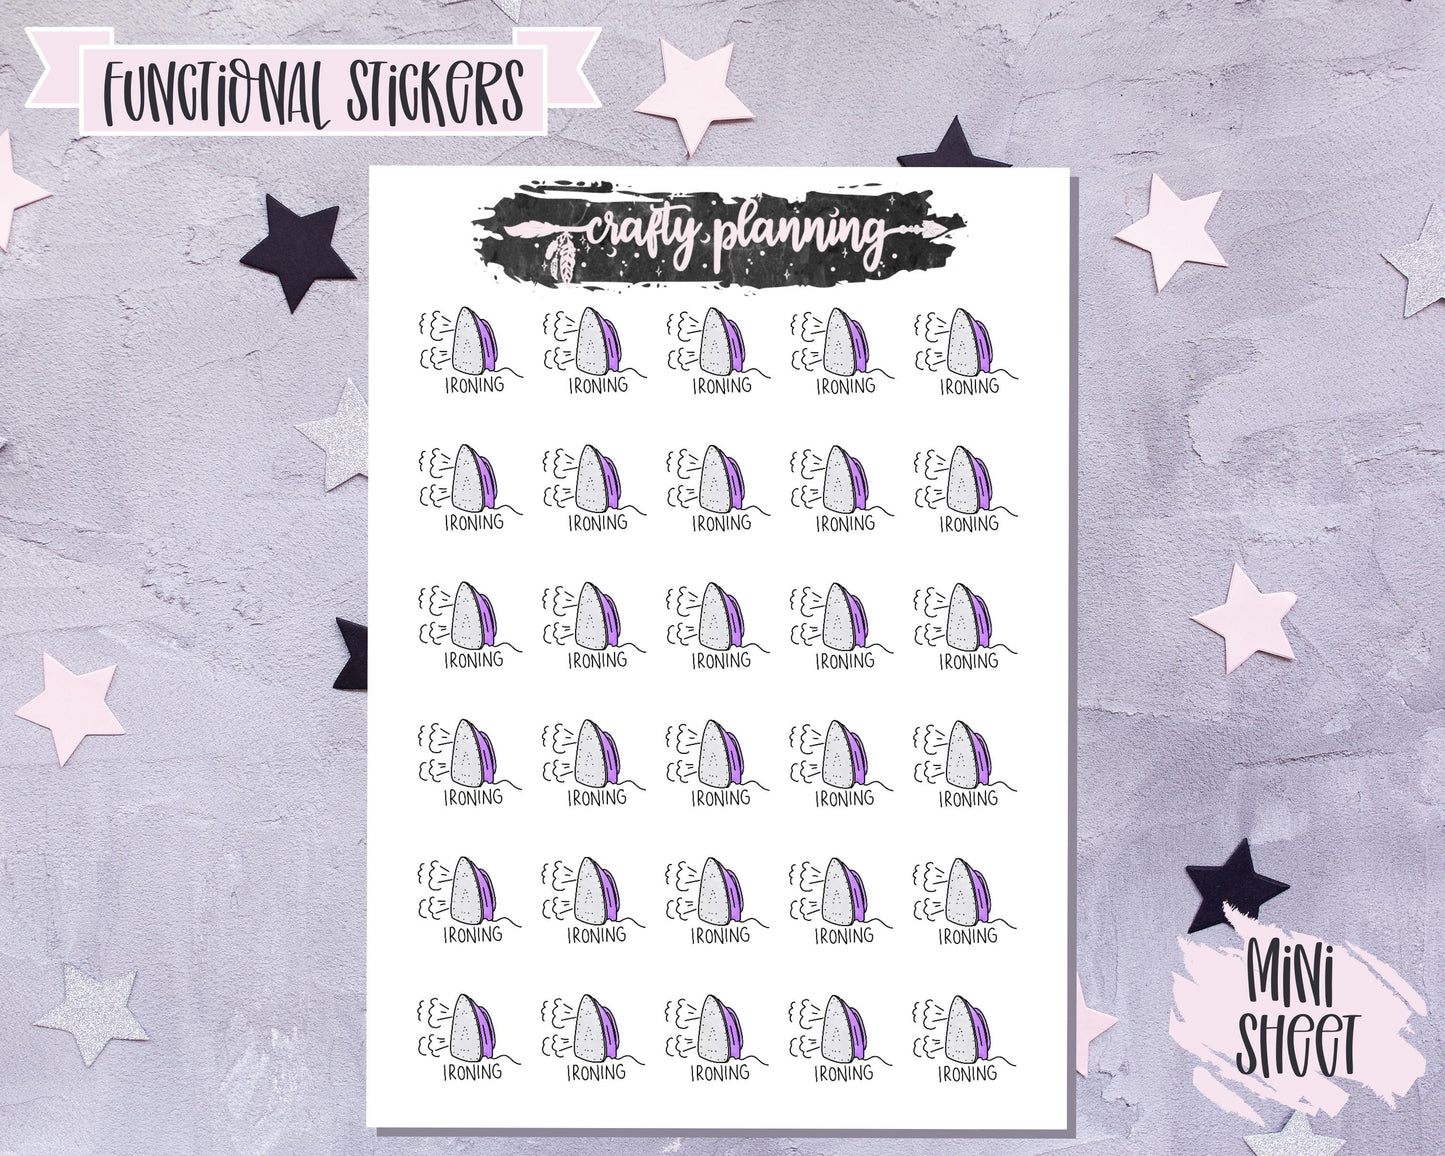 Ironing Stickers, Planner Stickers, Housework Stickers, Chores Stickers, Cleaning Stickers, Functional Stickers, Hand Drawn Stickers